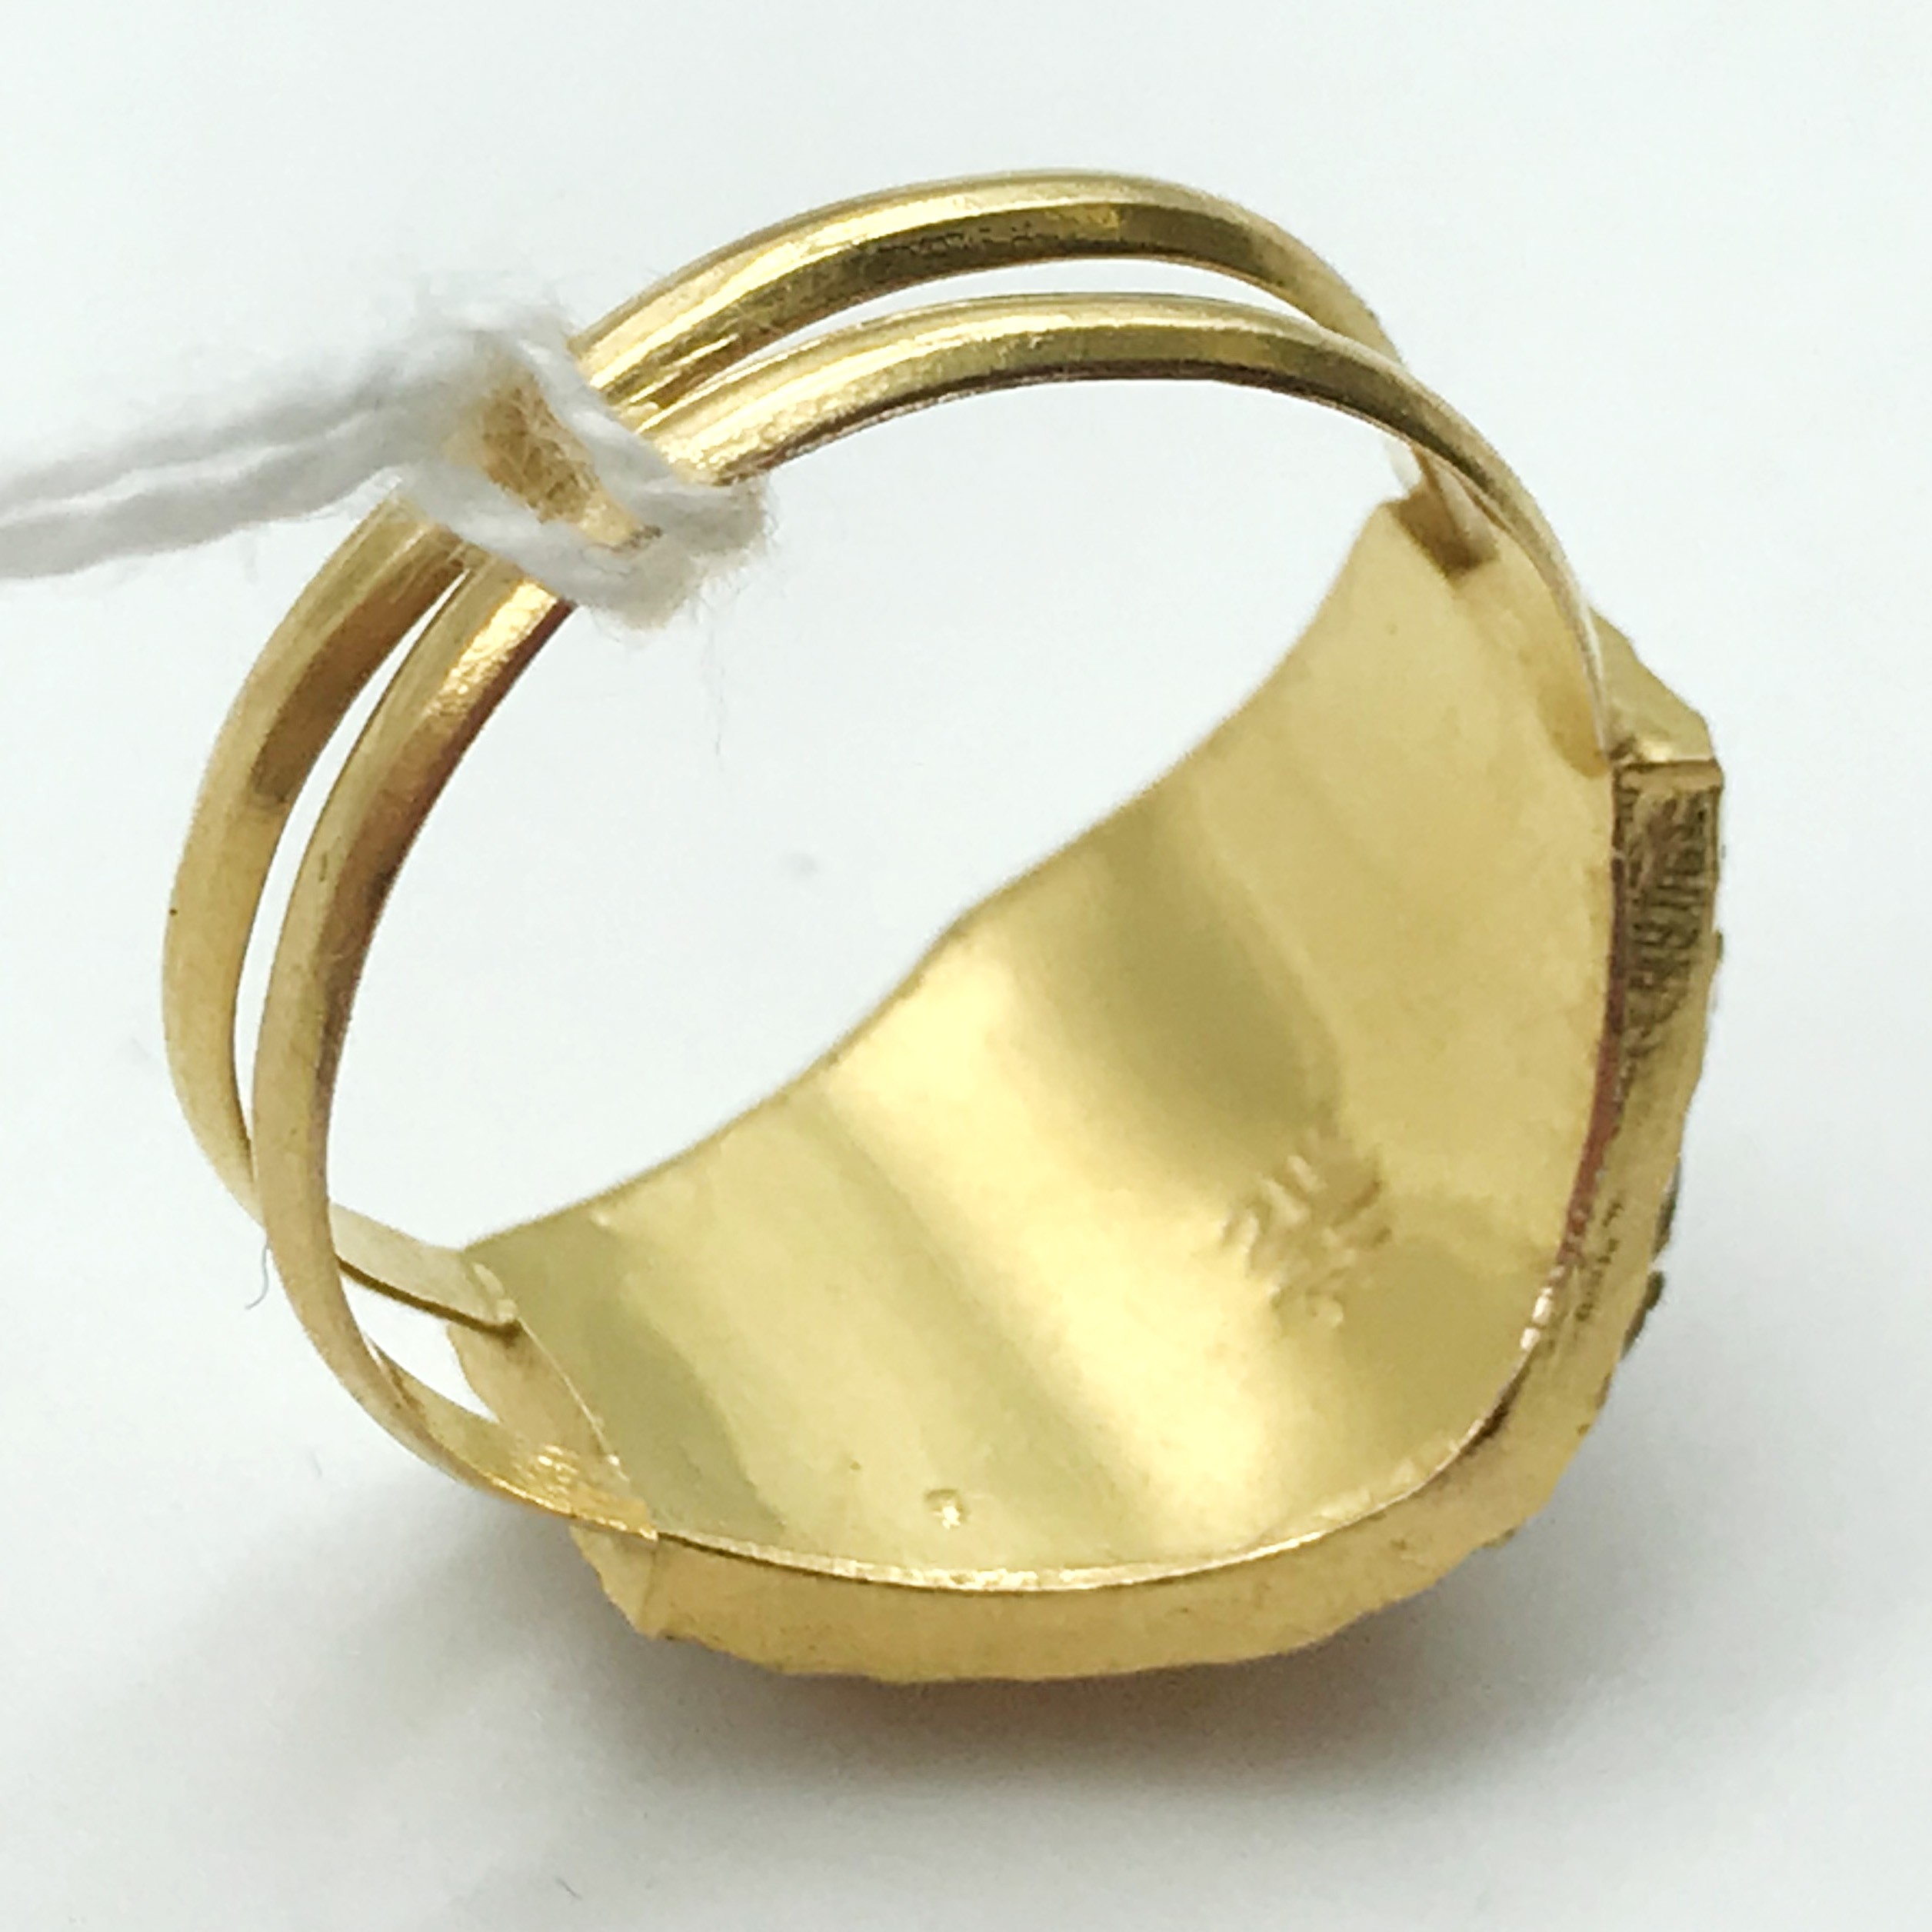 HIGH CARAT EGYPTIAN GOLD RING - Image 5 of 6